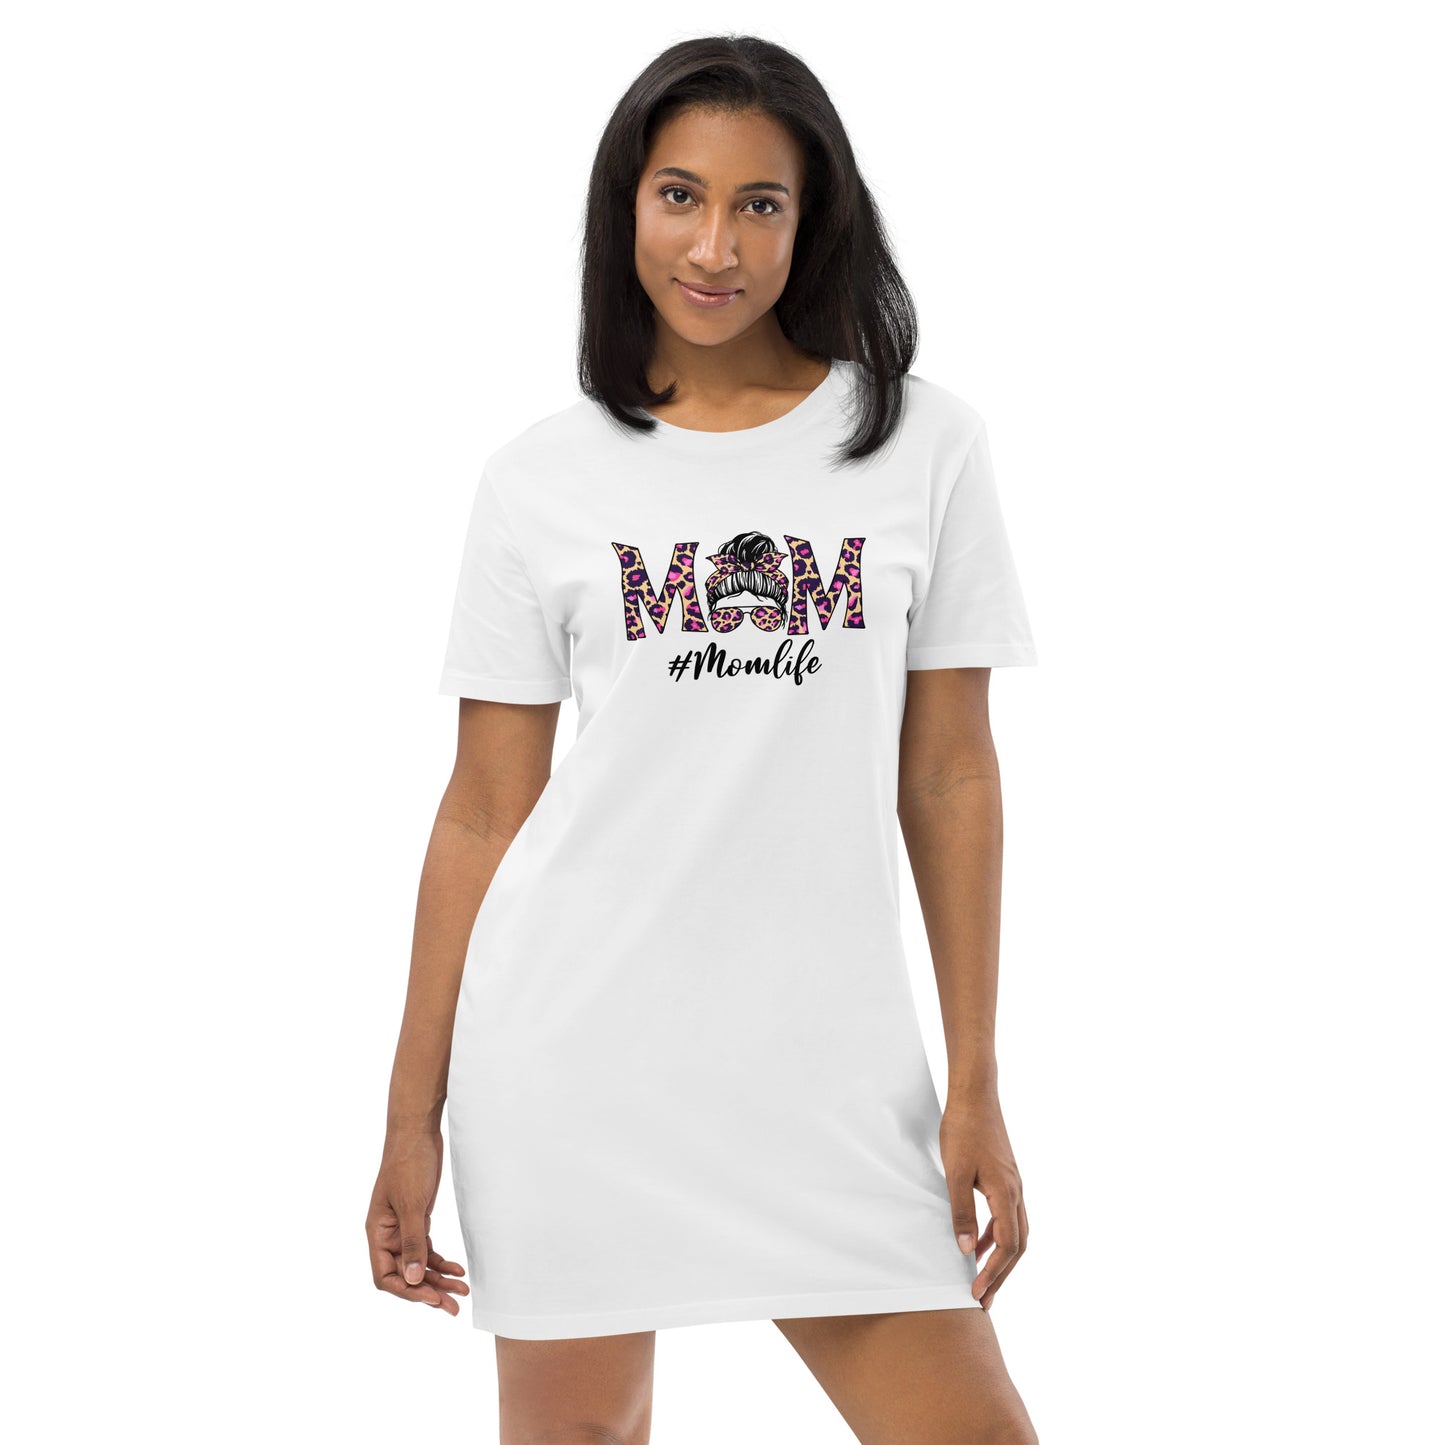 The super gift for Mothersday. Comfy organic cotton T-shirt dress in white for the best mom.